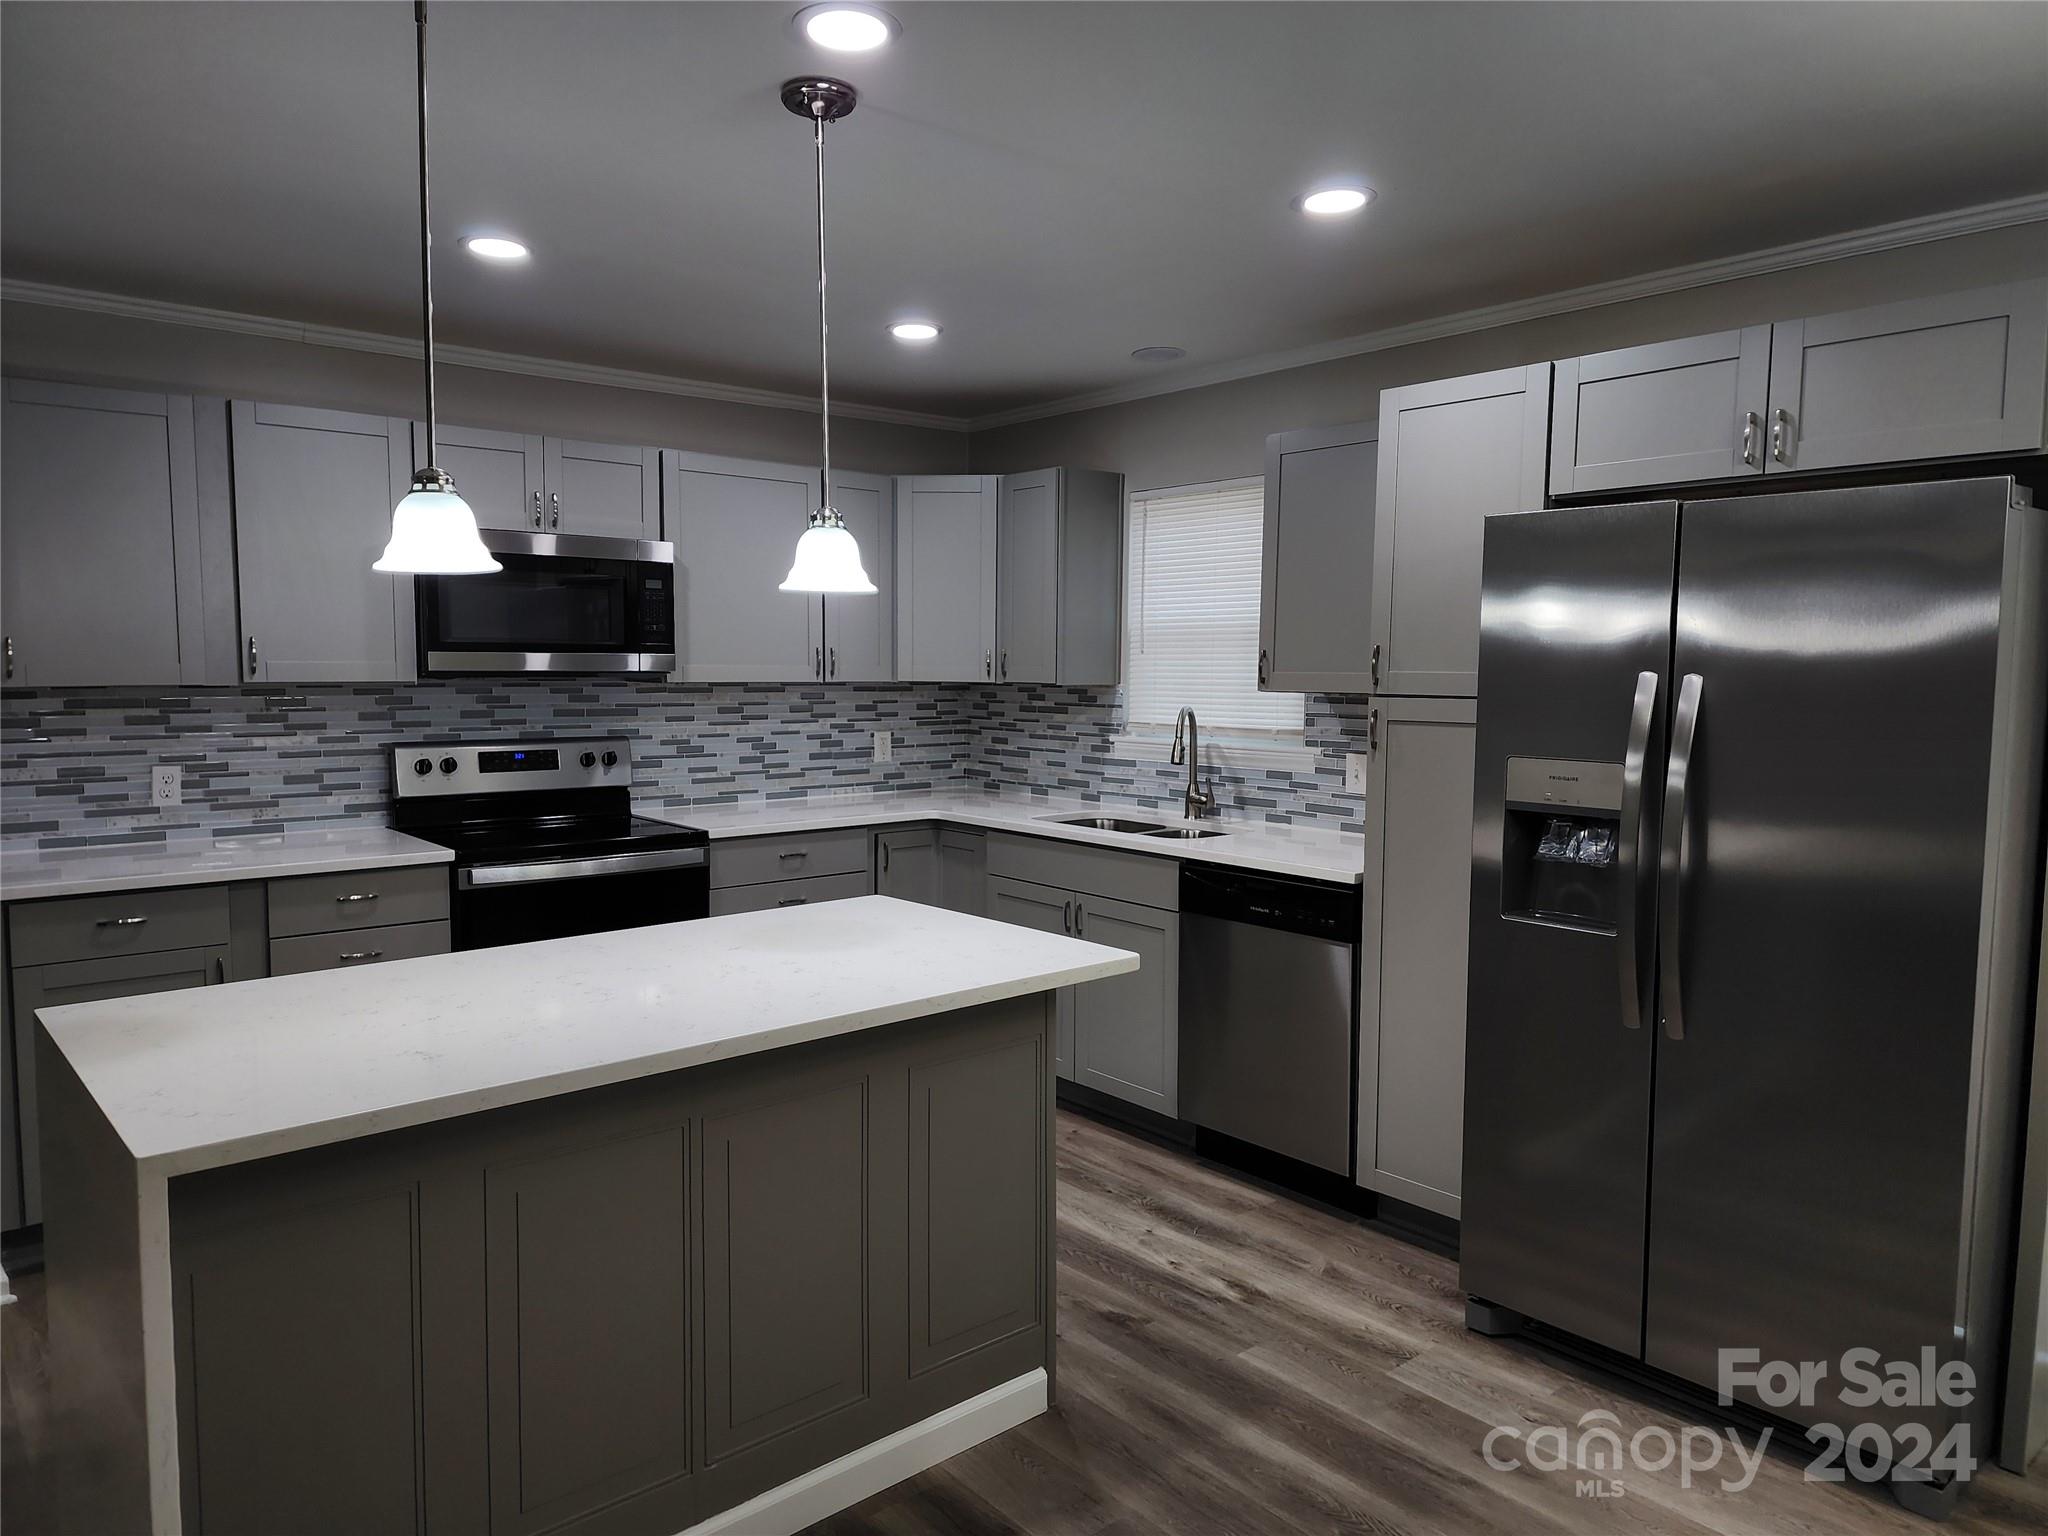 a kitchen with stainless steel appliances kitchen island granite countertop a refrigerator a sink a stove a microwave a counter space and cabinets